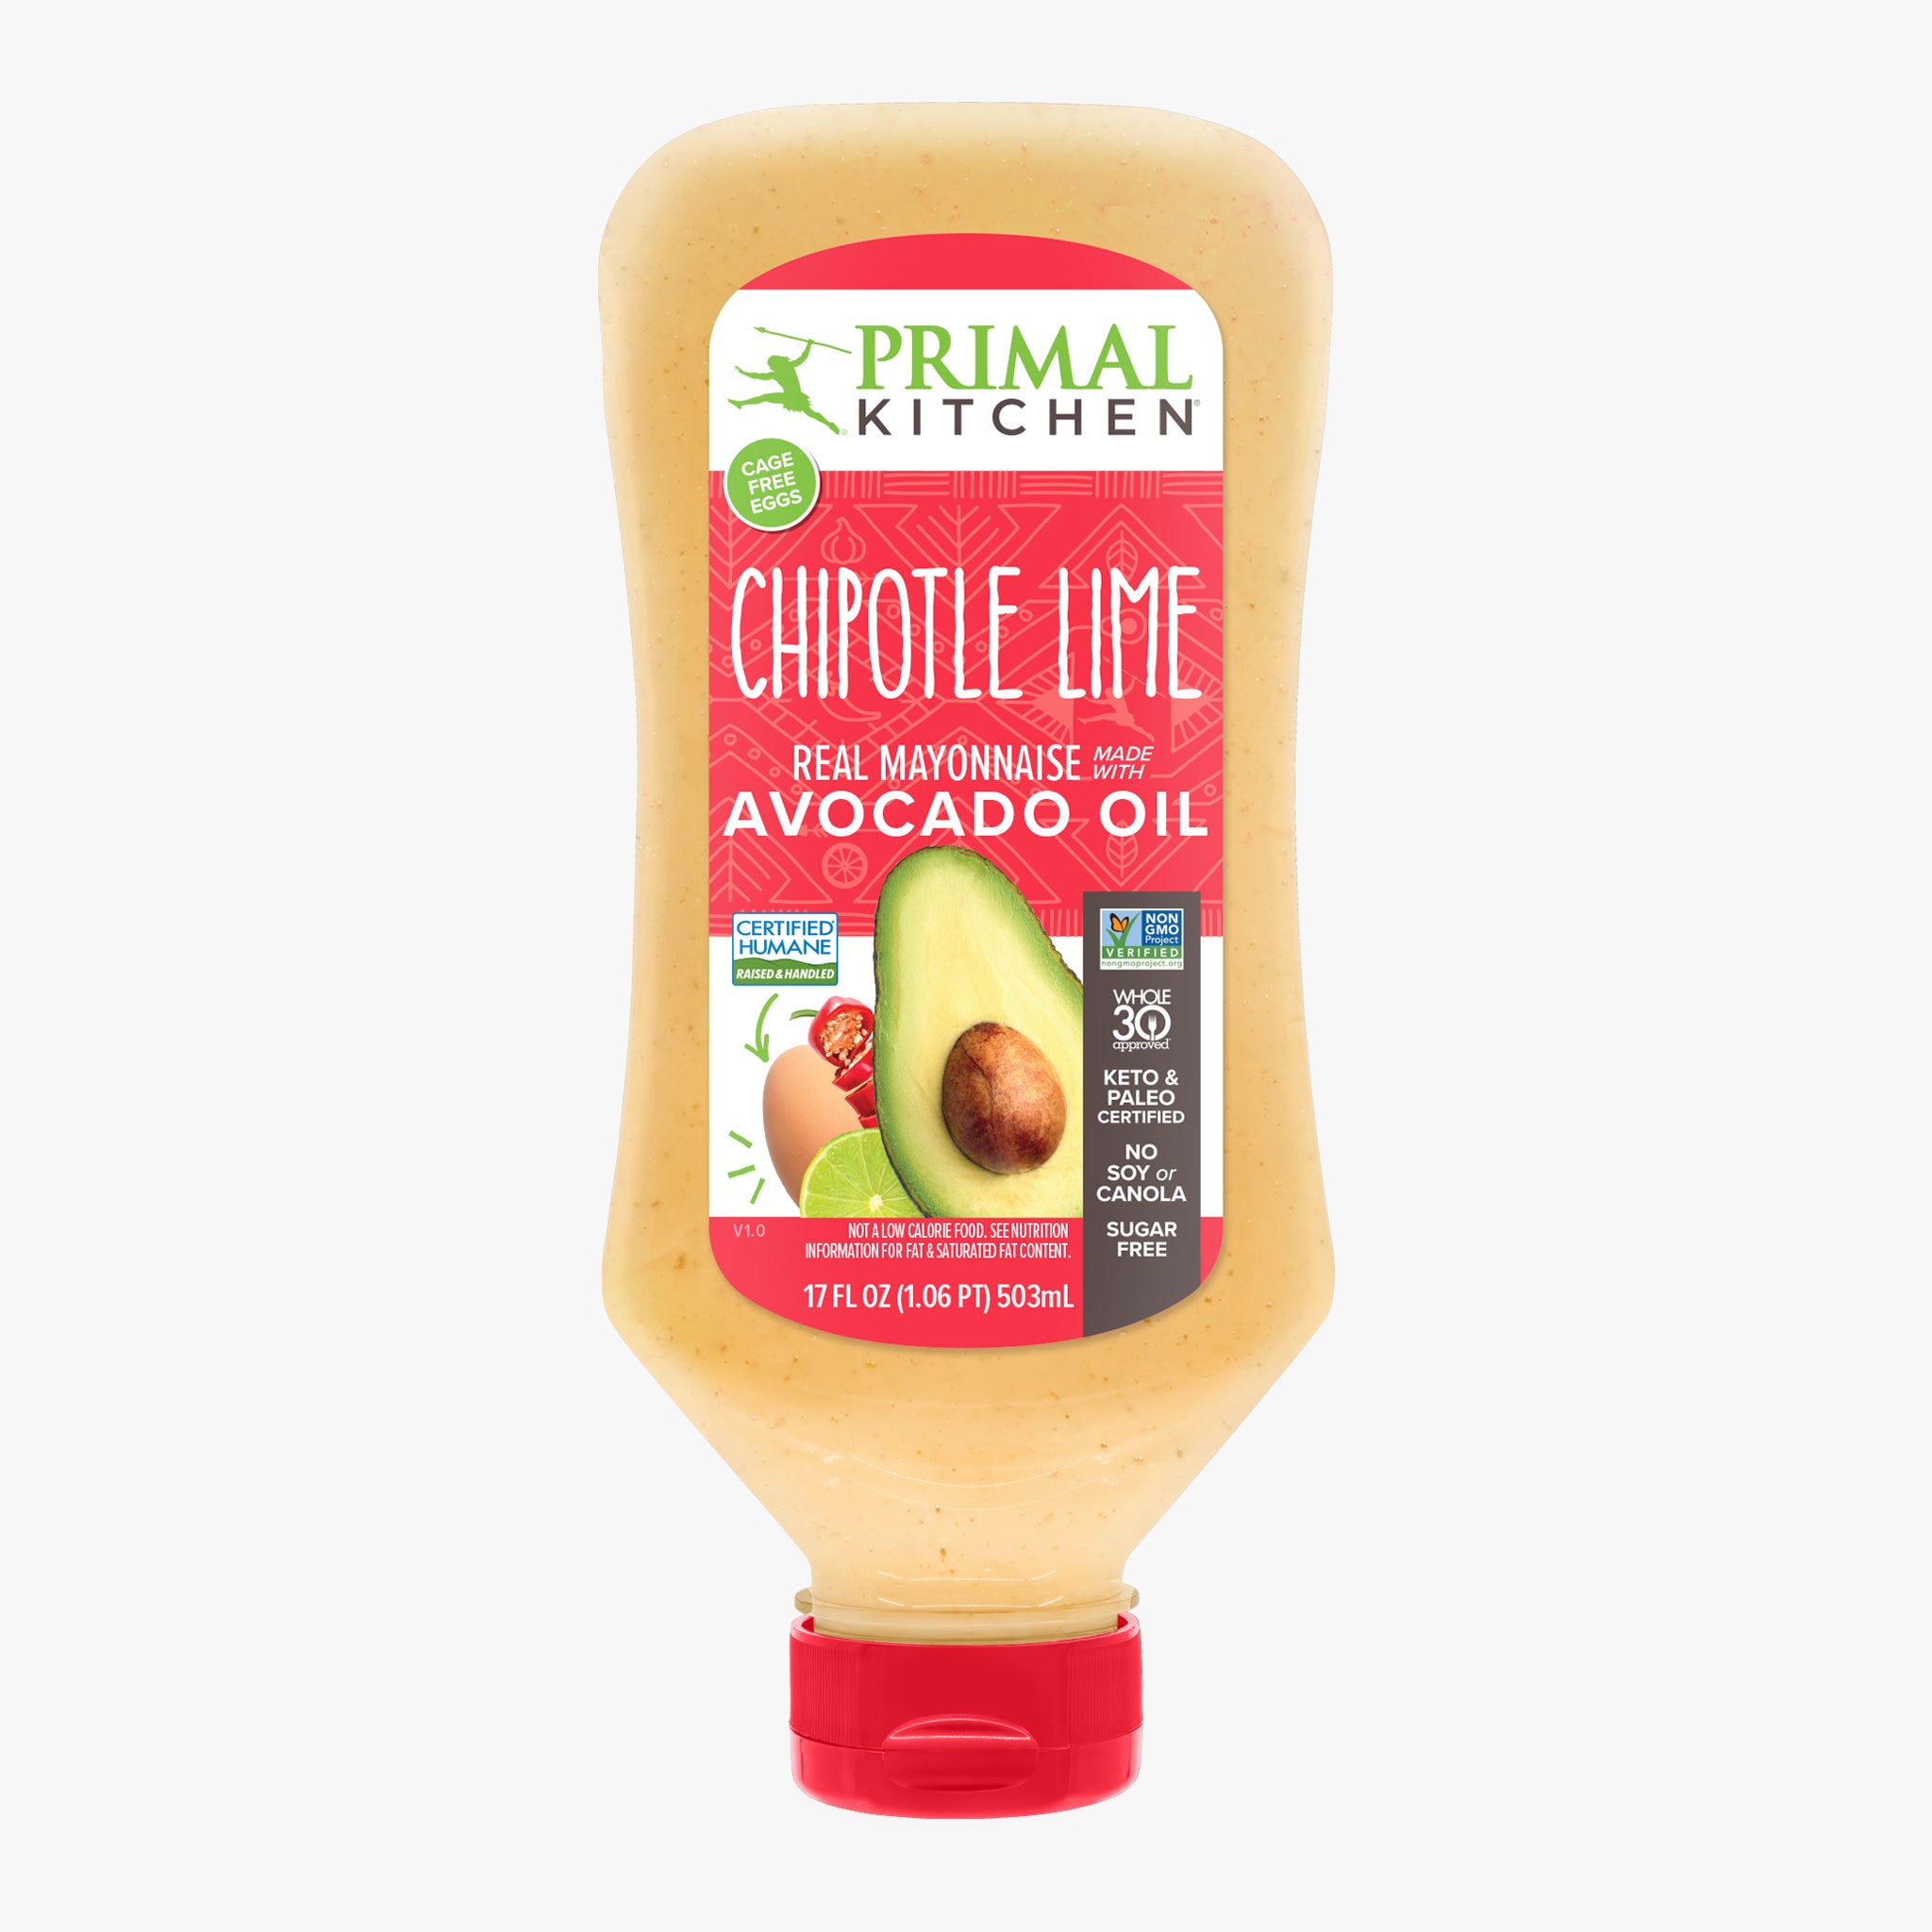 A squeeze bottle of Squeeze Chipotle Lime Mayo made with Avocado Oil with a red label and lid on a light grey background.